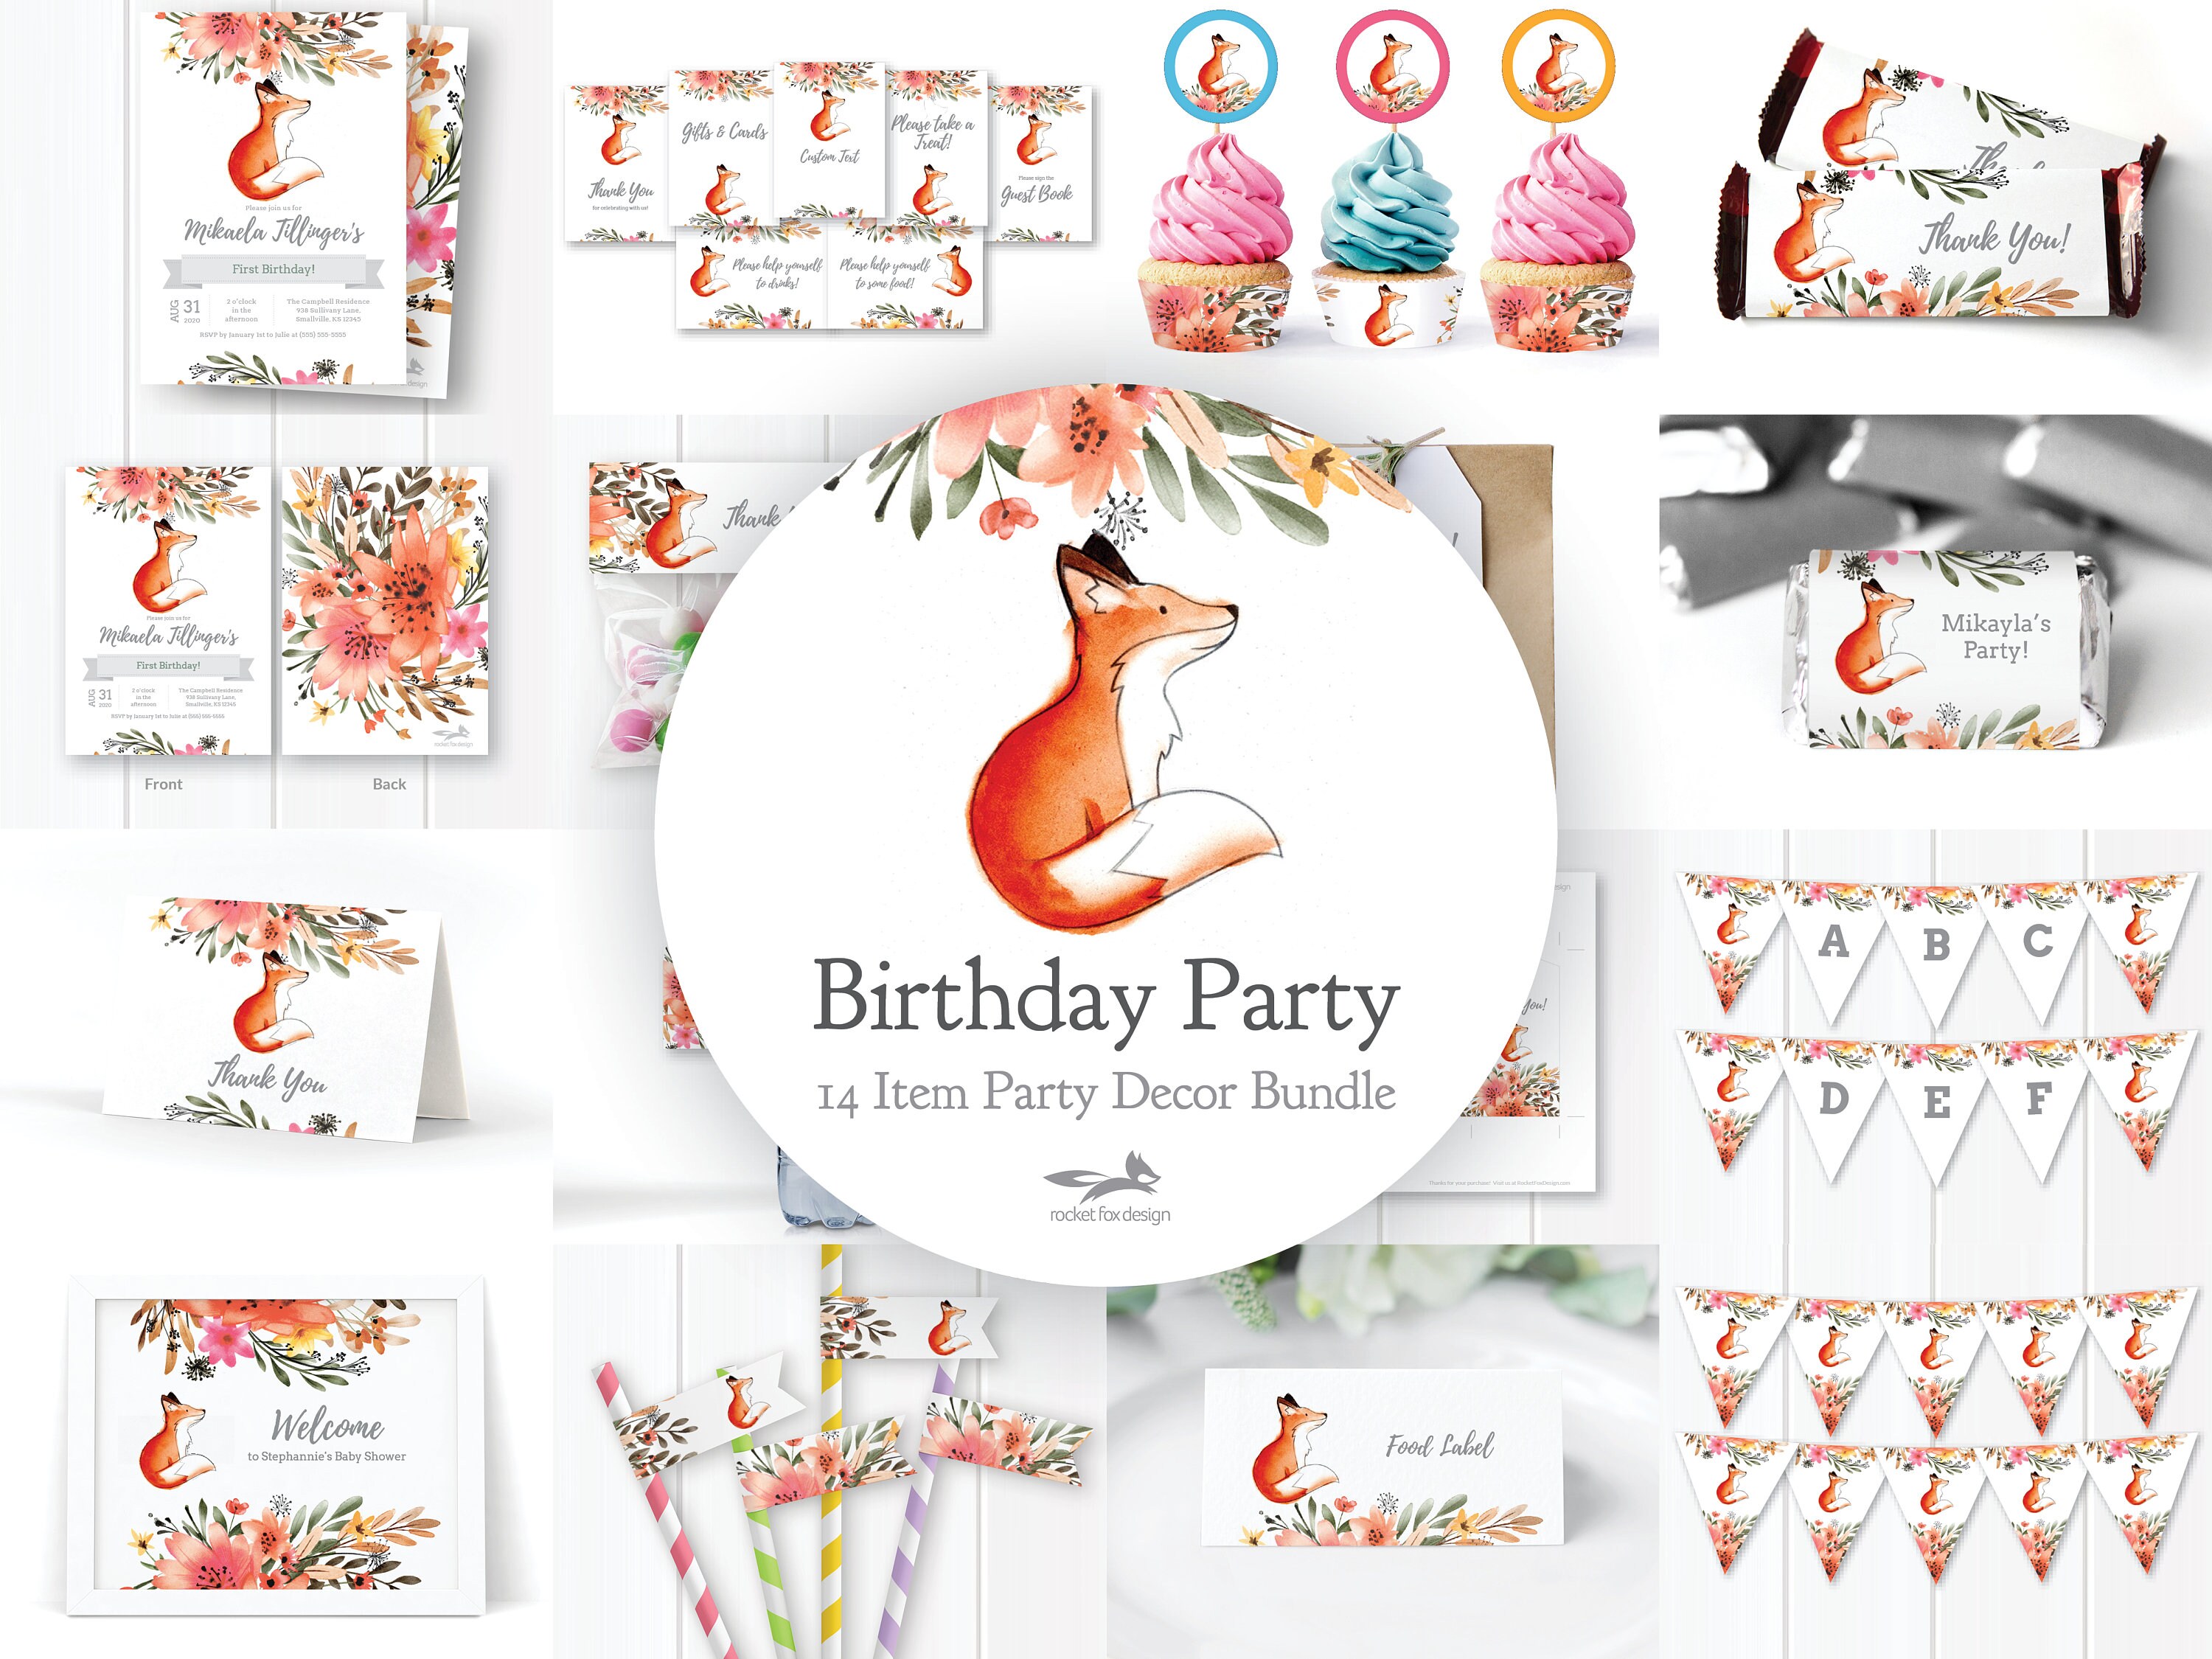 Fox Theme Birthday Party Supplies Decorations, 48PCS Fox Party Supplies Kit  Includes Fox Happy Birthday Banner, Fox Balloons And Various Party